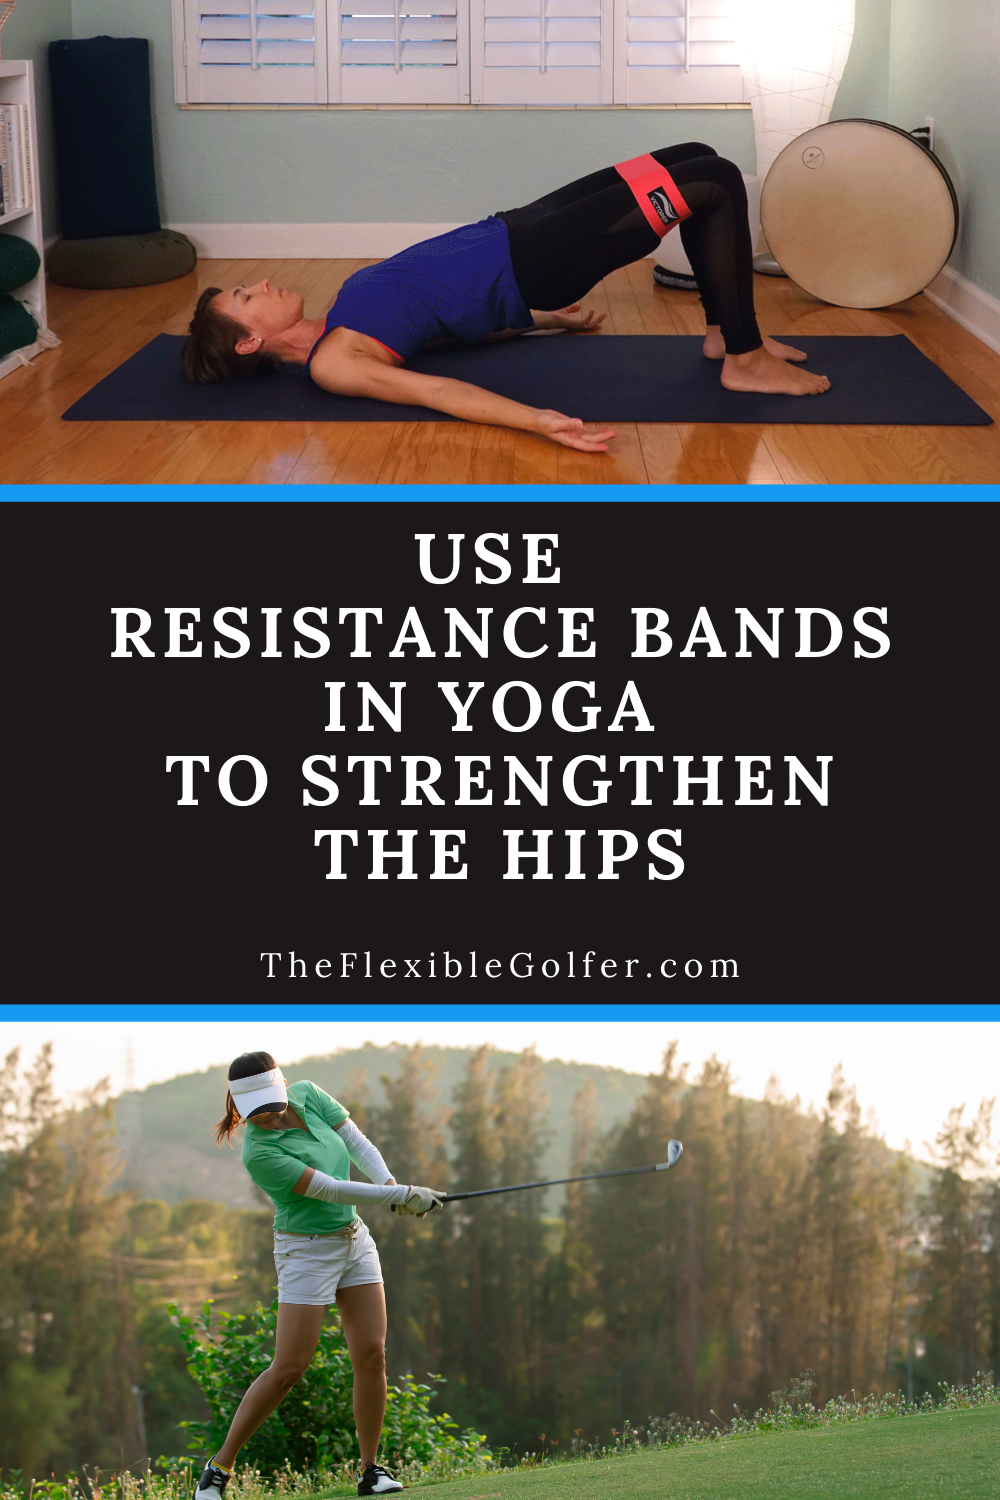 USE RESISTANCE BANDS IN YOGA TO STRENGTHEN THE HIPS